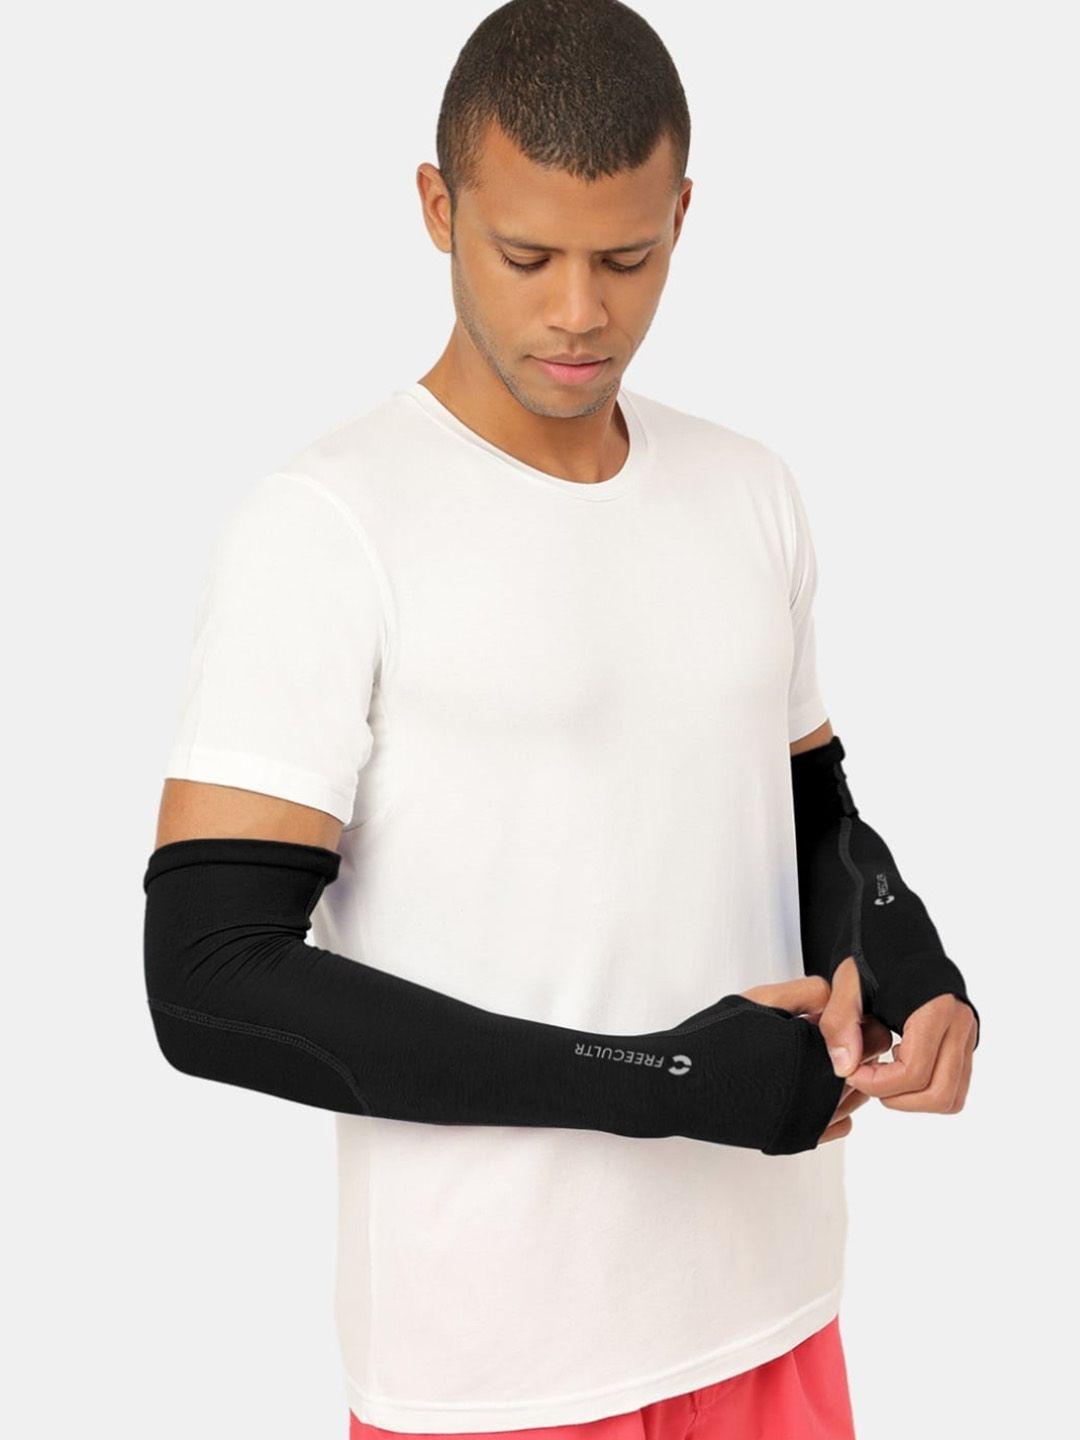 freecultr-bamboo-cotton-breathable-&-anti-bacterial-arm-sleeves-with-in-built-gloves